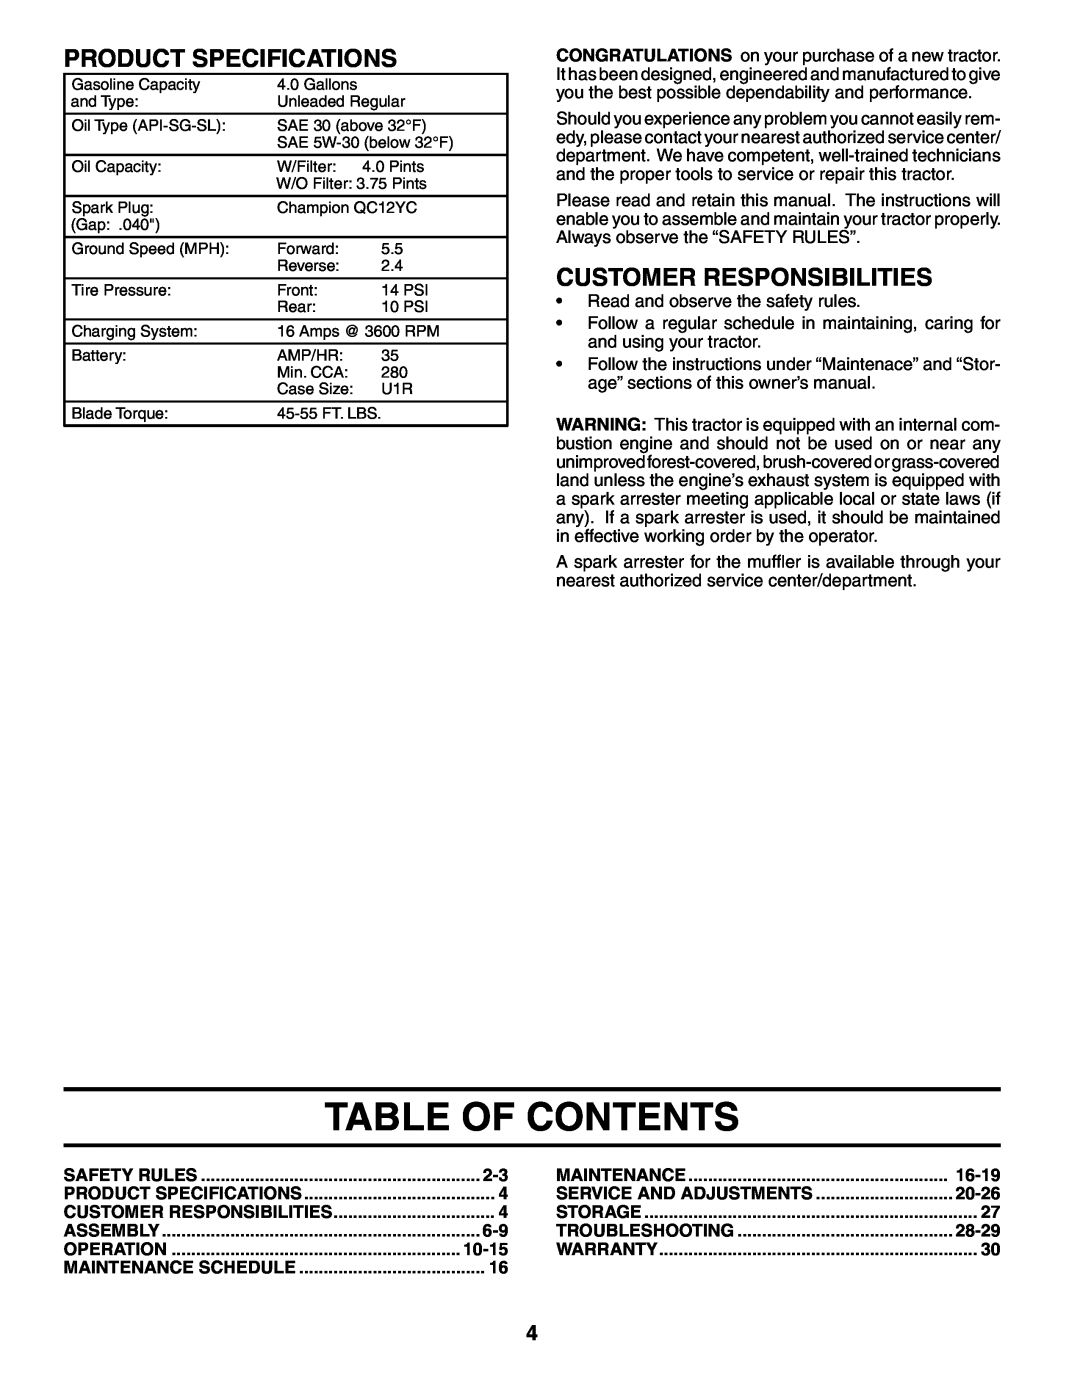 Poulan 195032 manual Table Of Contents, Product Specifications, Customer Responsibilities 